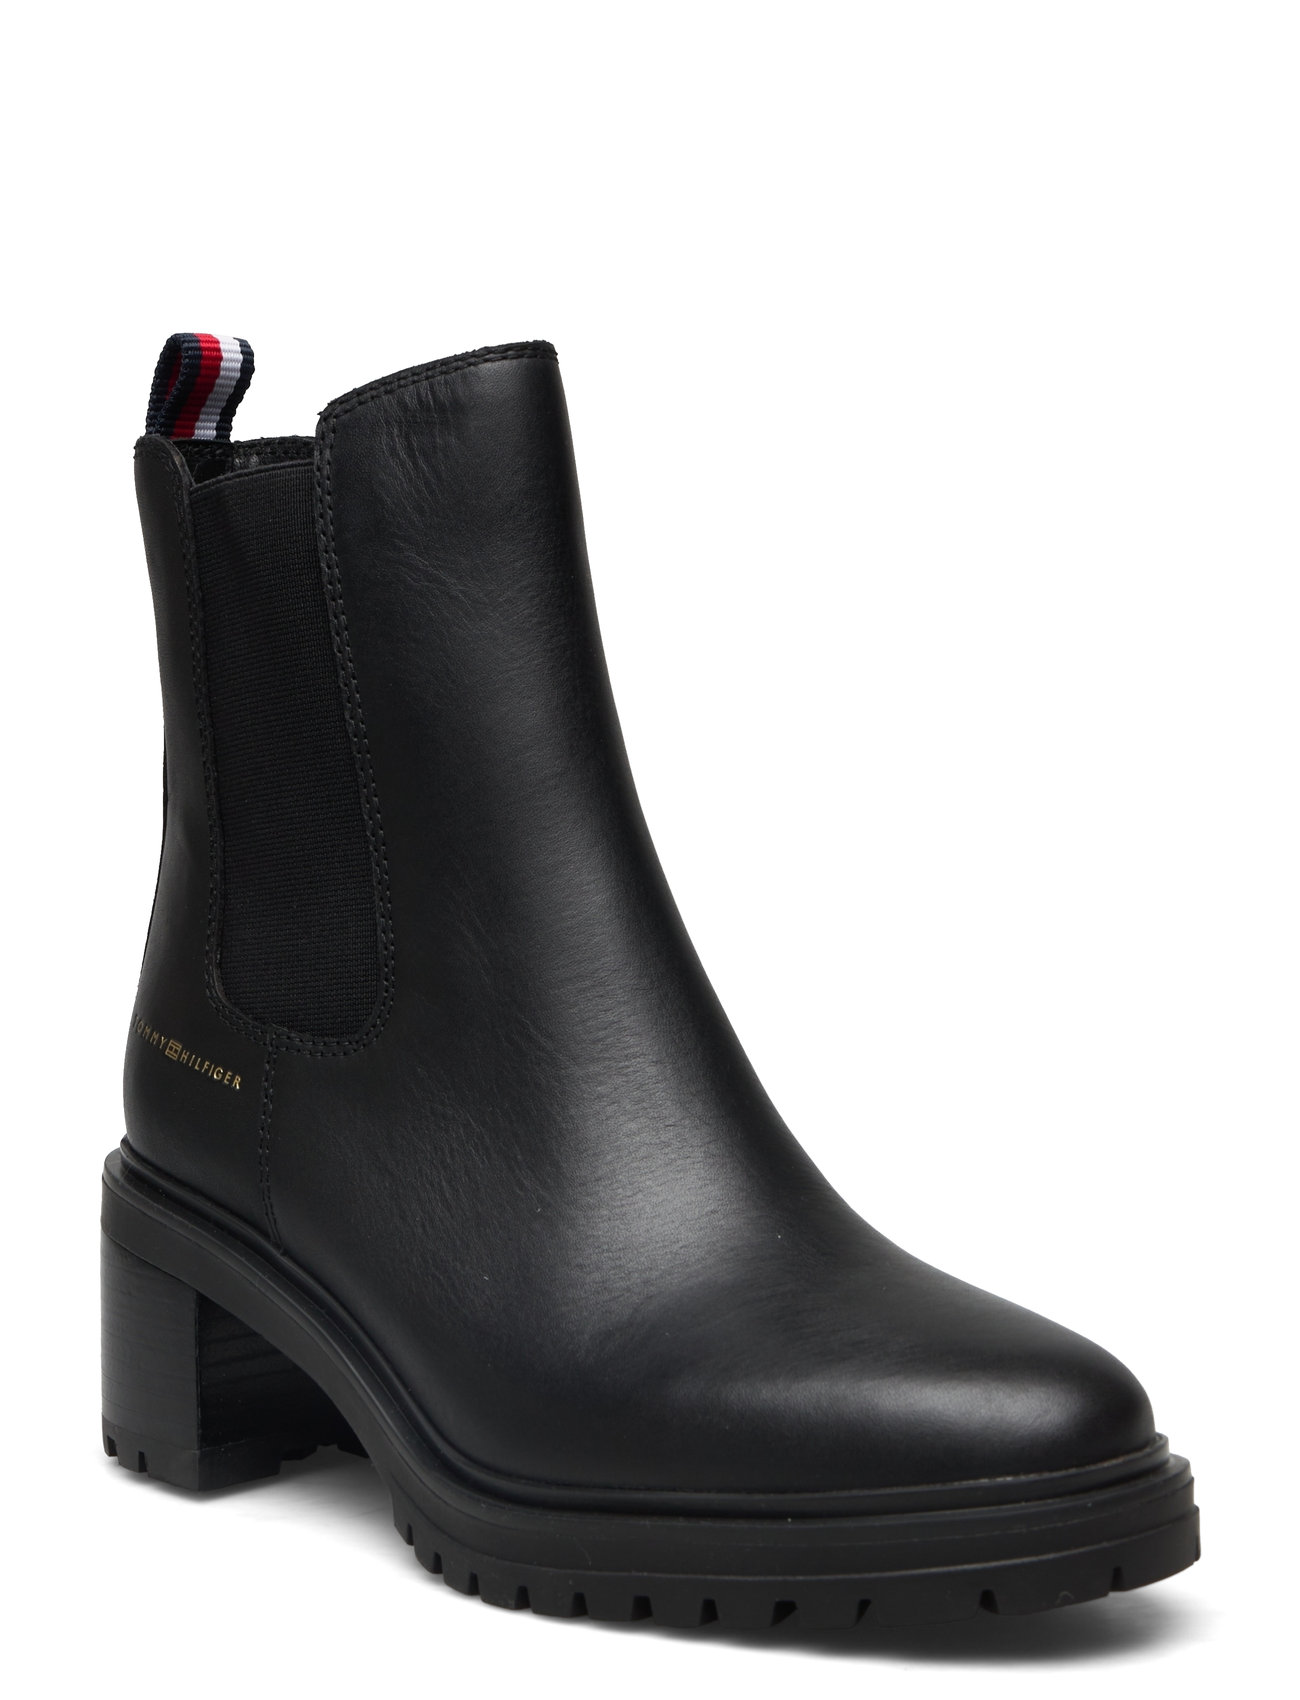 Essential Midheel Leather Bootie Shoes Boots Ankle Boots Ankle Boots With Heel Black Tommy Hilfiger